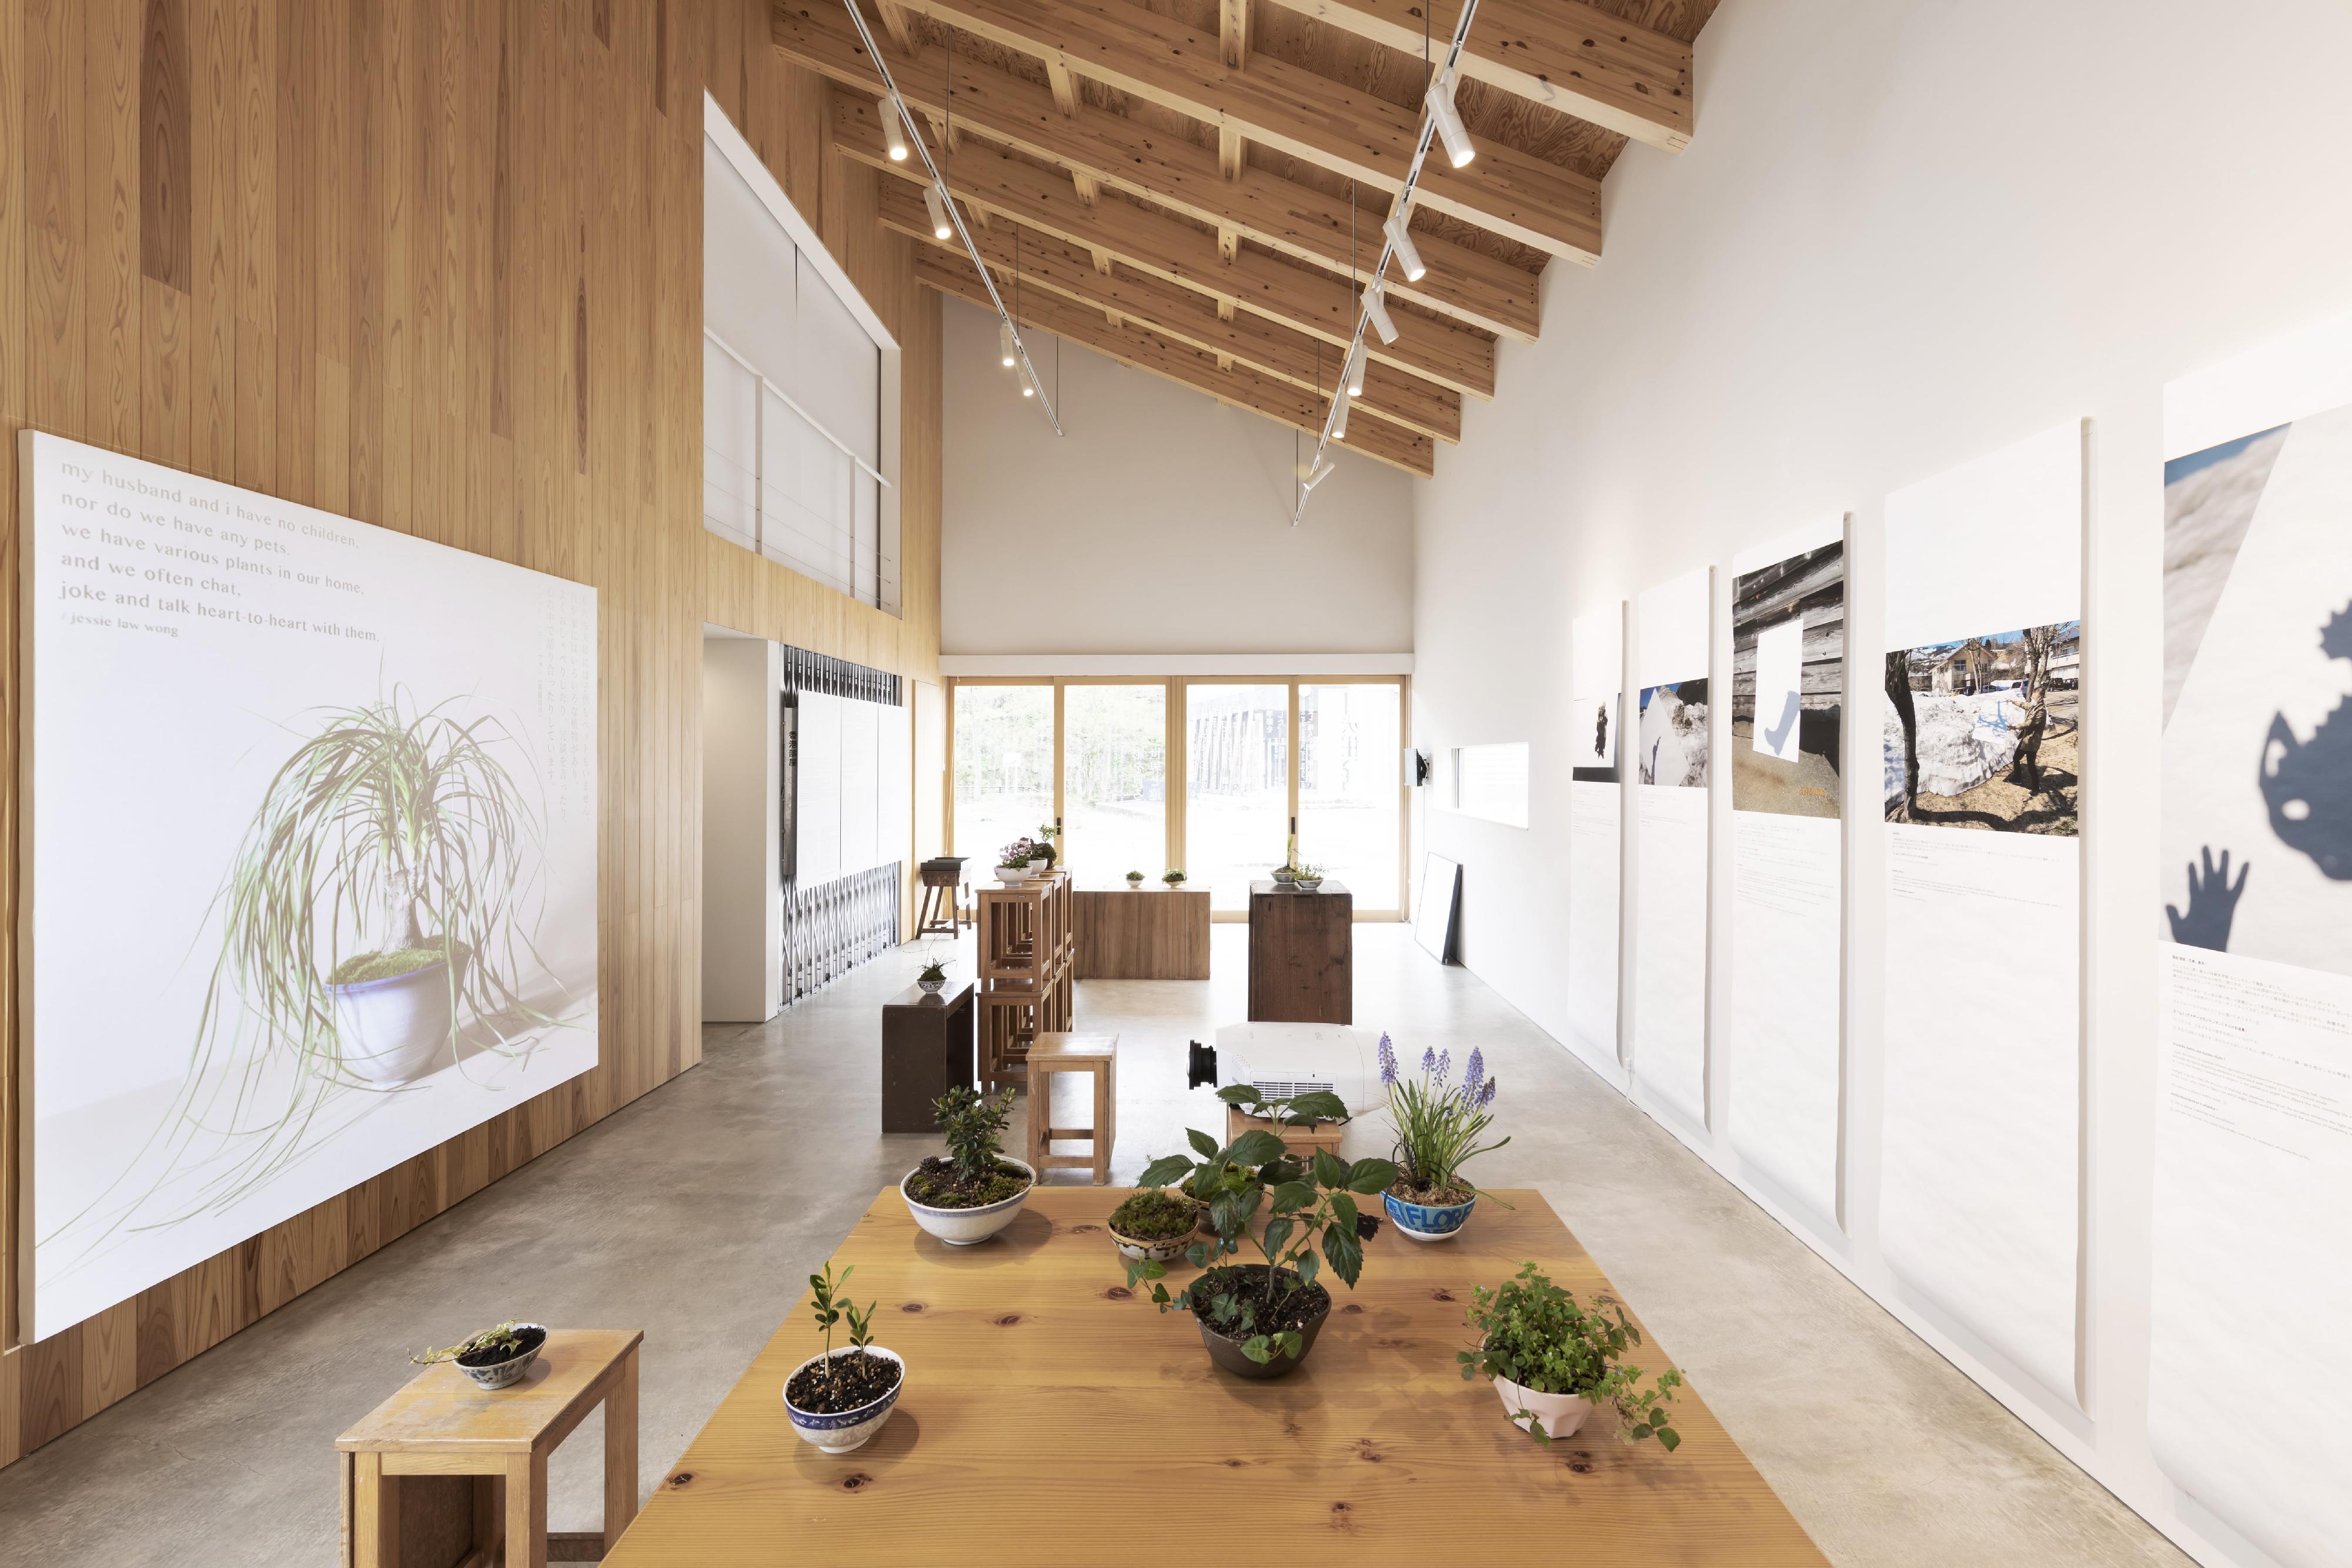 The Hong Kong House at the Echigo-Tsumari Art Triennale 2022 is open in Tsunan, Niigata Prefecture, Japan, from today (April 29) to November 13. Photo shows Hong Kong artist anothermountainman's (Stanley Wong)  creative works with the theme "Dialogue with Nature" - "A Bowl of Life" and "Painting by God".